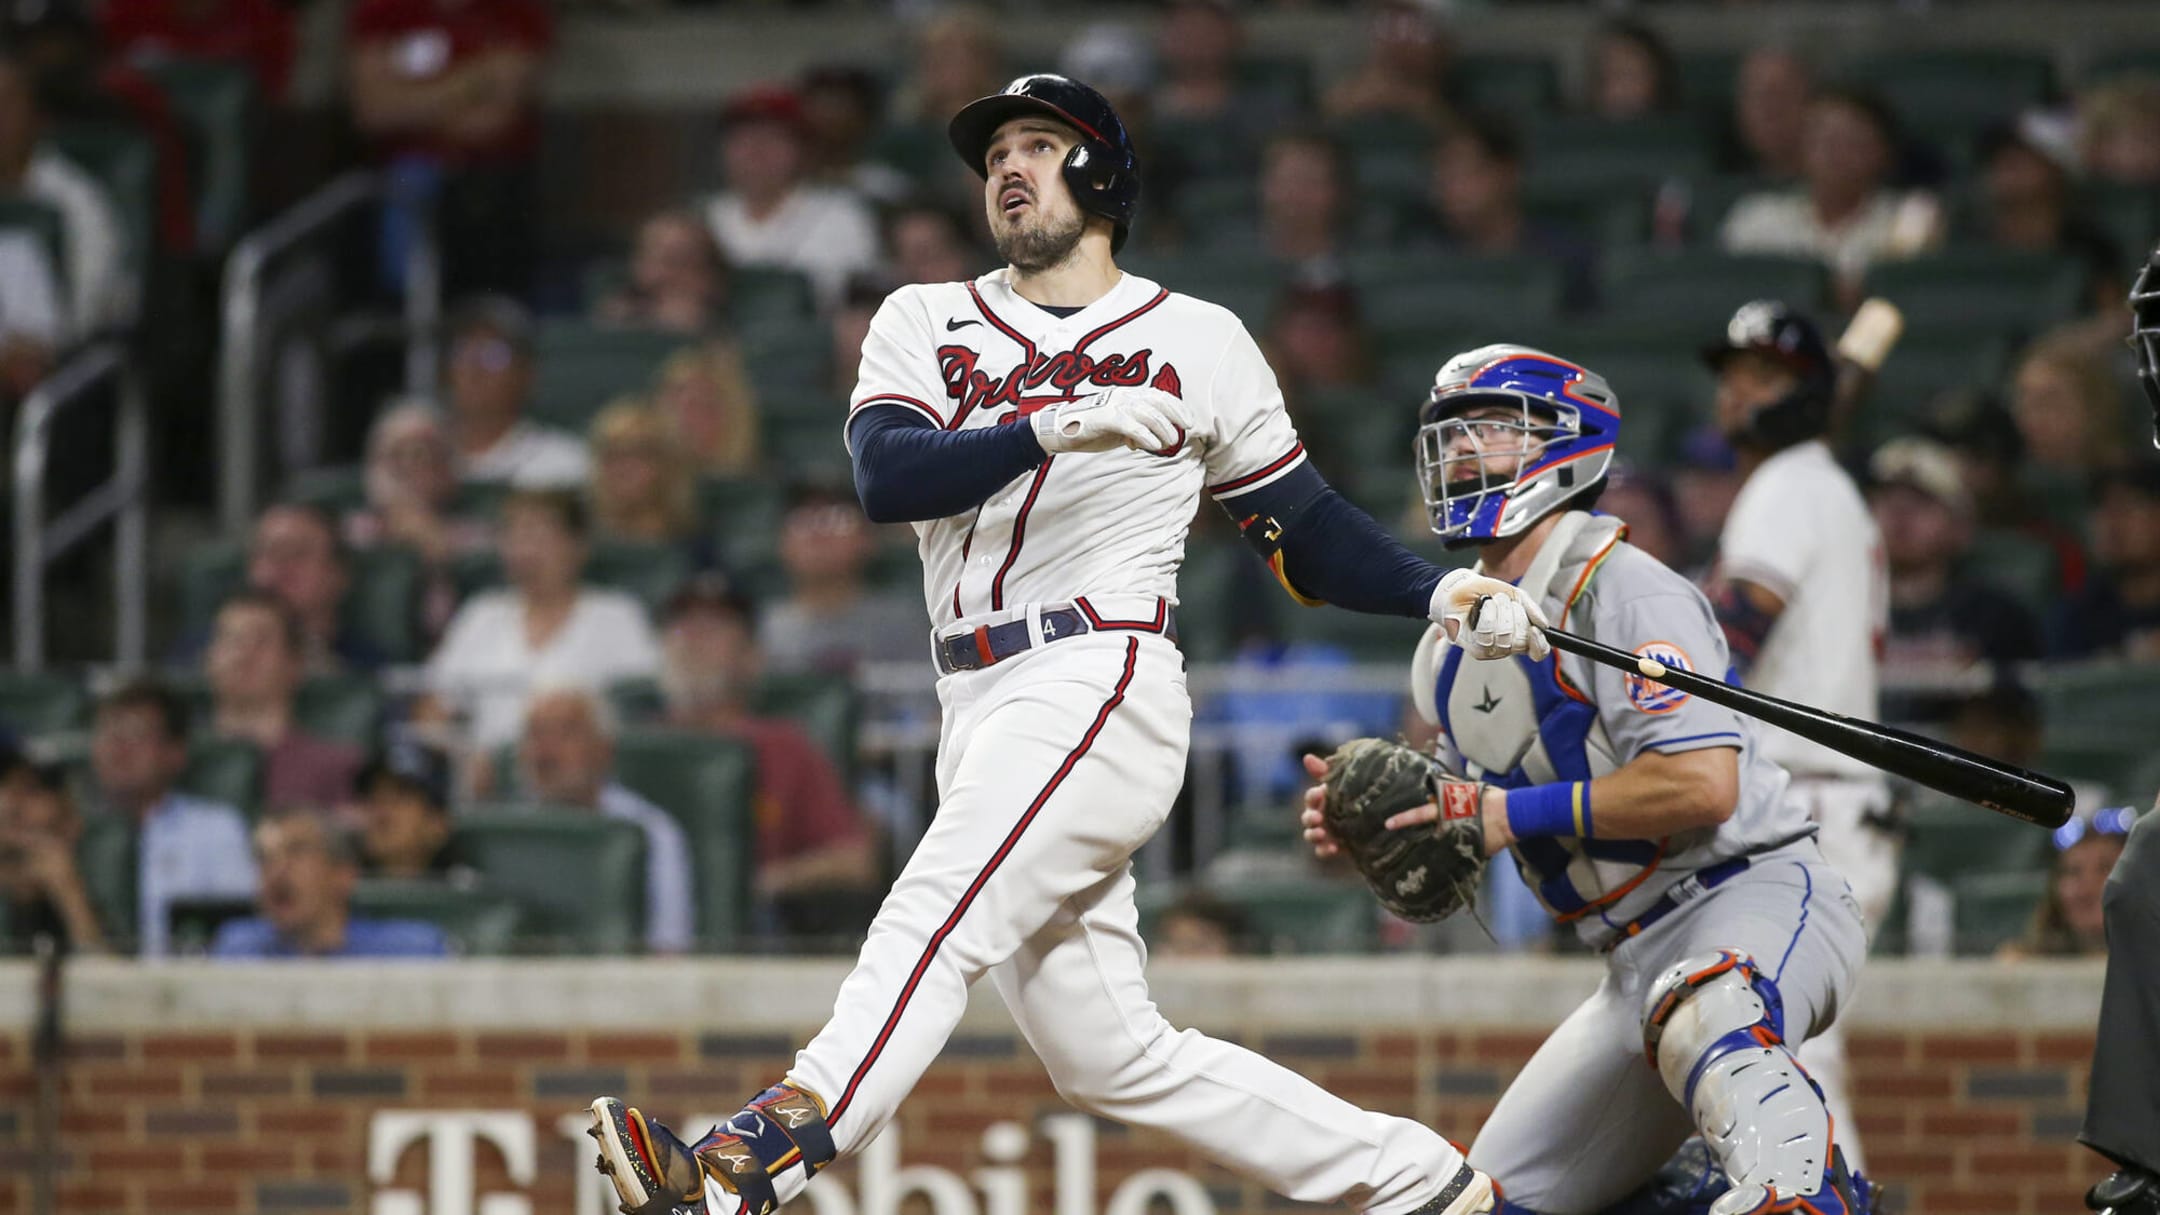 Braves outfielder Adam Duvall to have season-ending wrist surgery, reports  say – WSB-TV Channel 2 - Atlanta